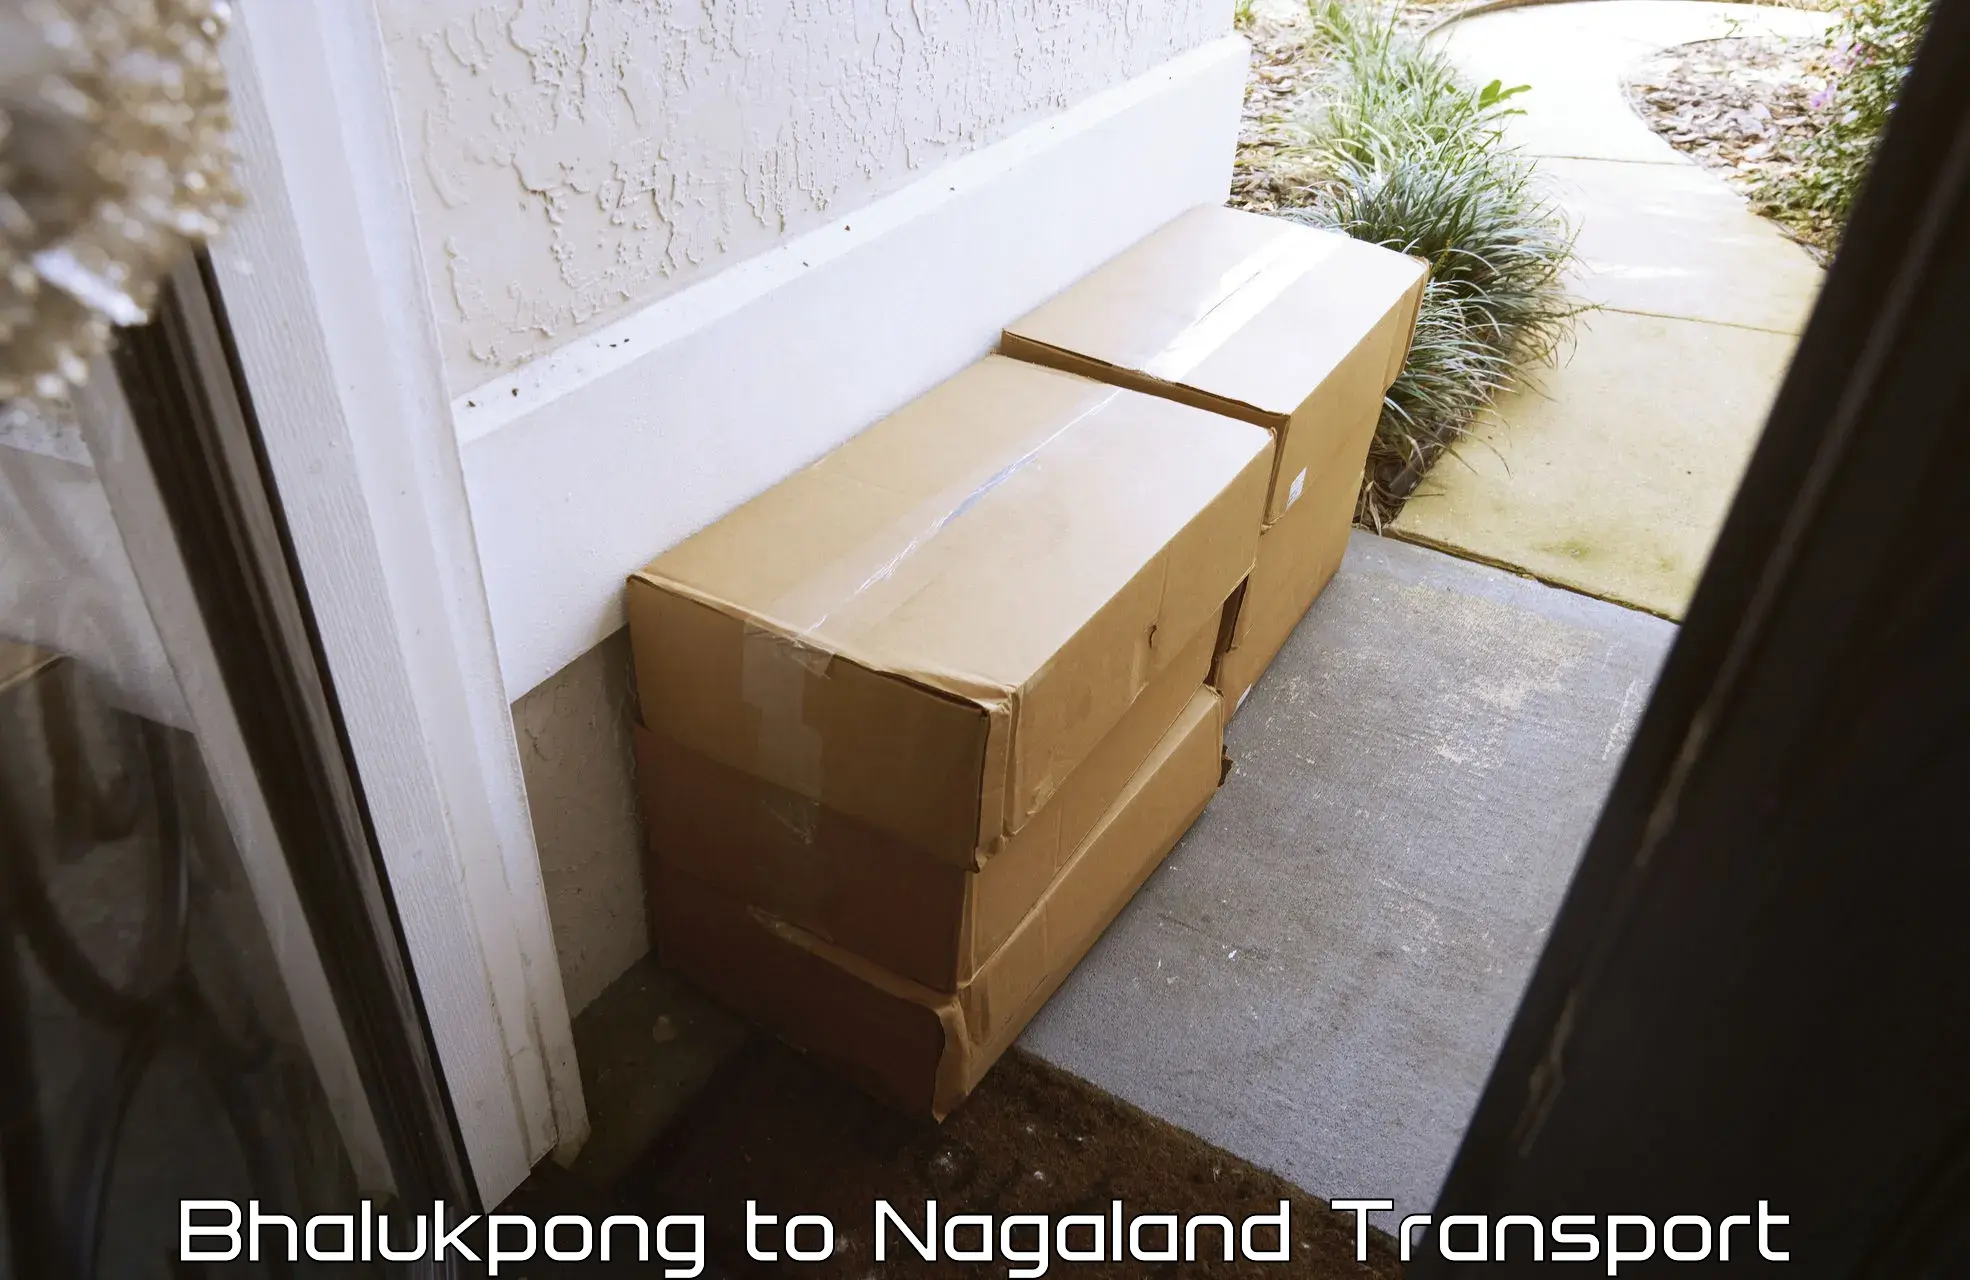 Sending bike to another city Bhalukpong to Nagaland